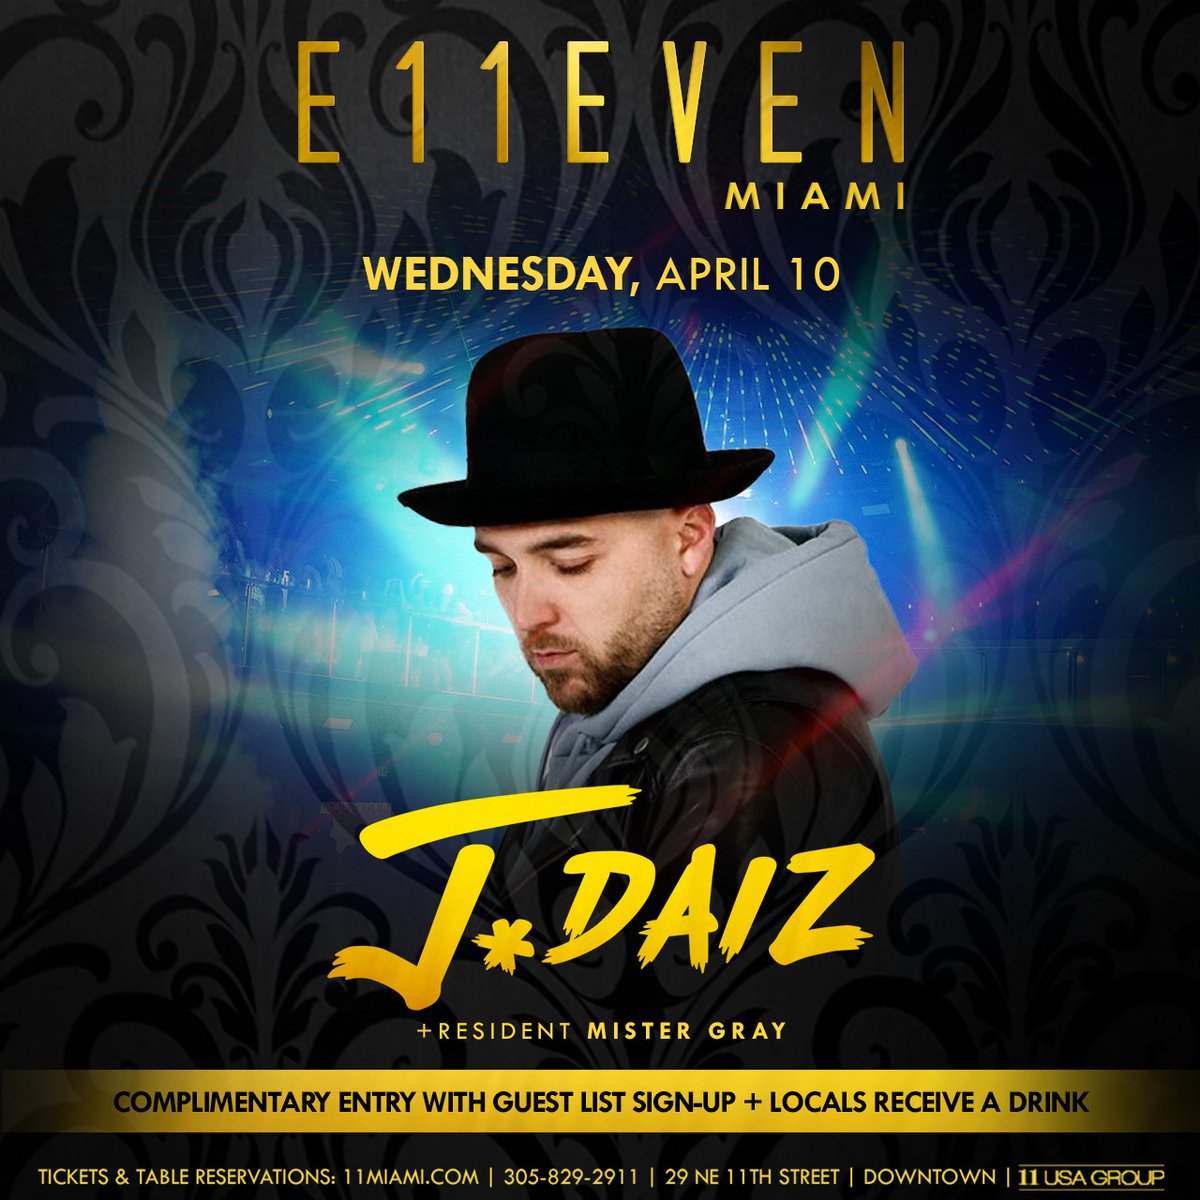 Party under the halo with @iamjdaiz this Wednesday, April 10th! Tickets & Tables link in bio | 11miami.com #11Miami